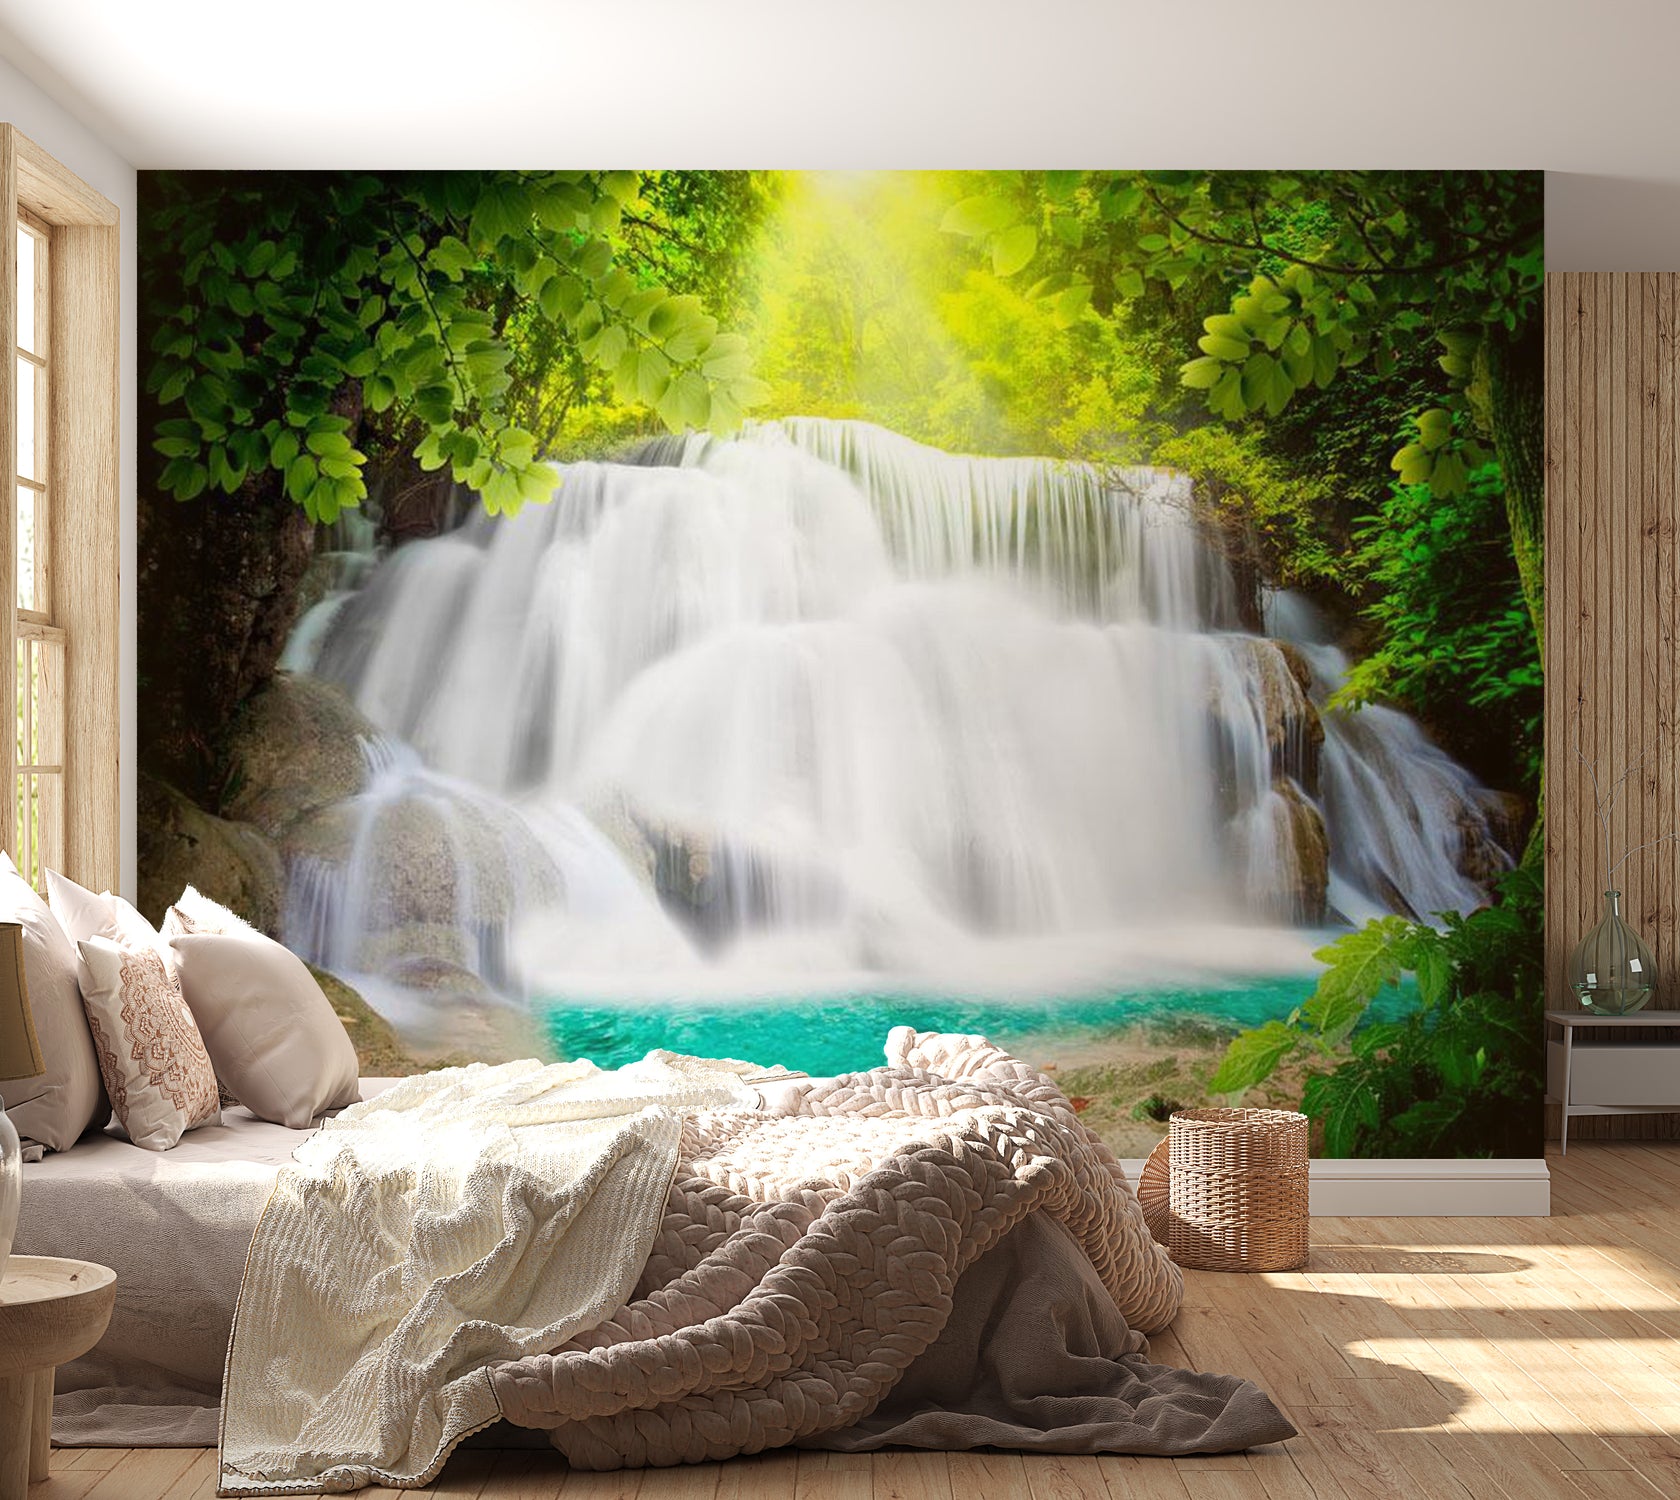 Peel & Stick Nature Wall Mural - Arcadian Waterfall - Removable Wall Decals